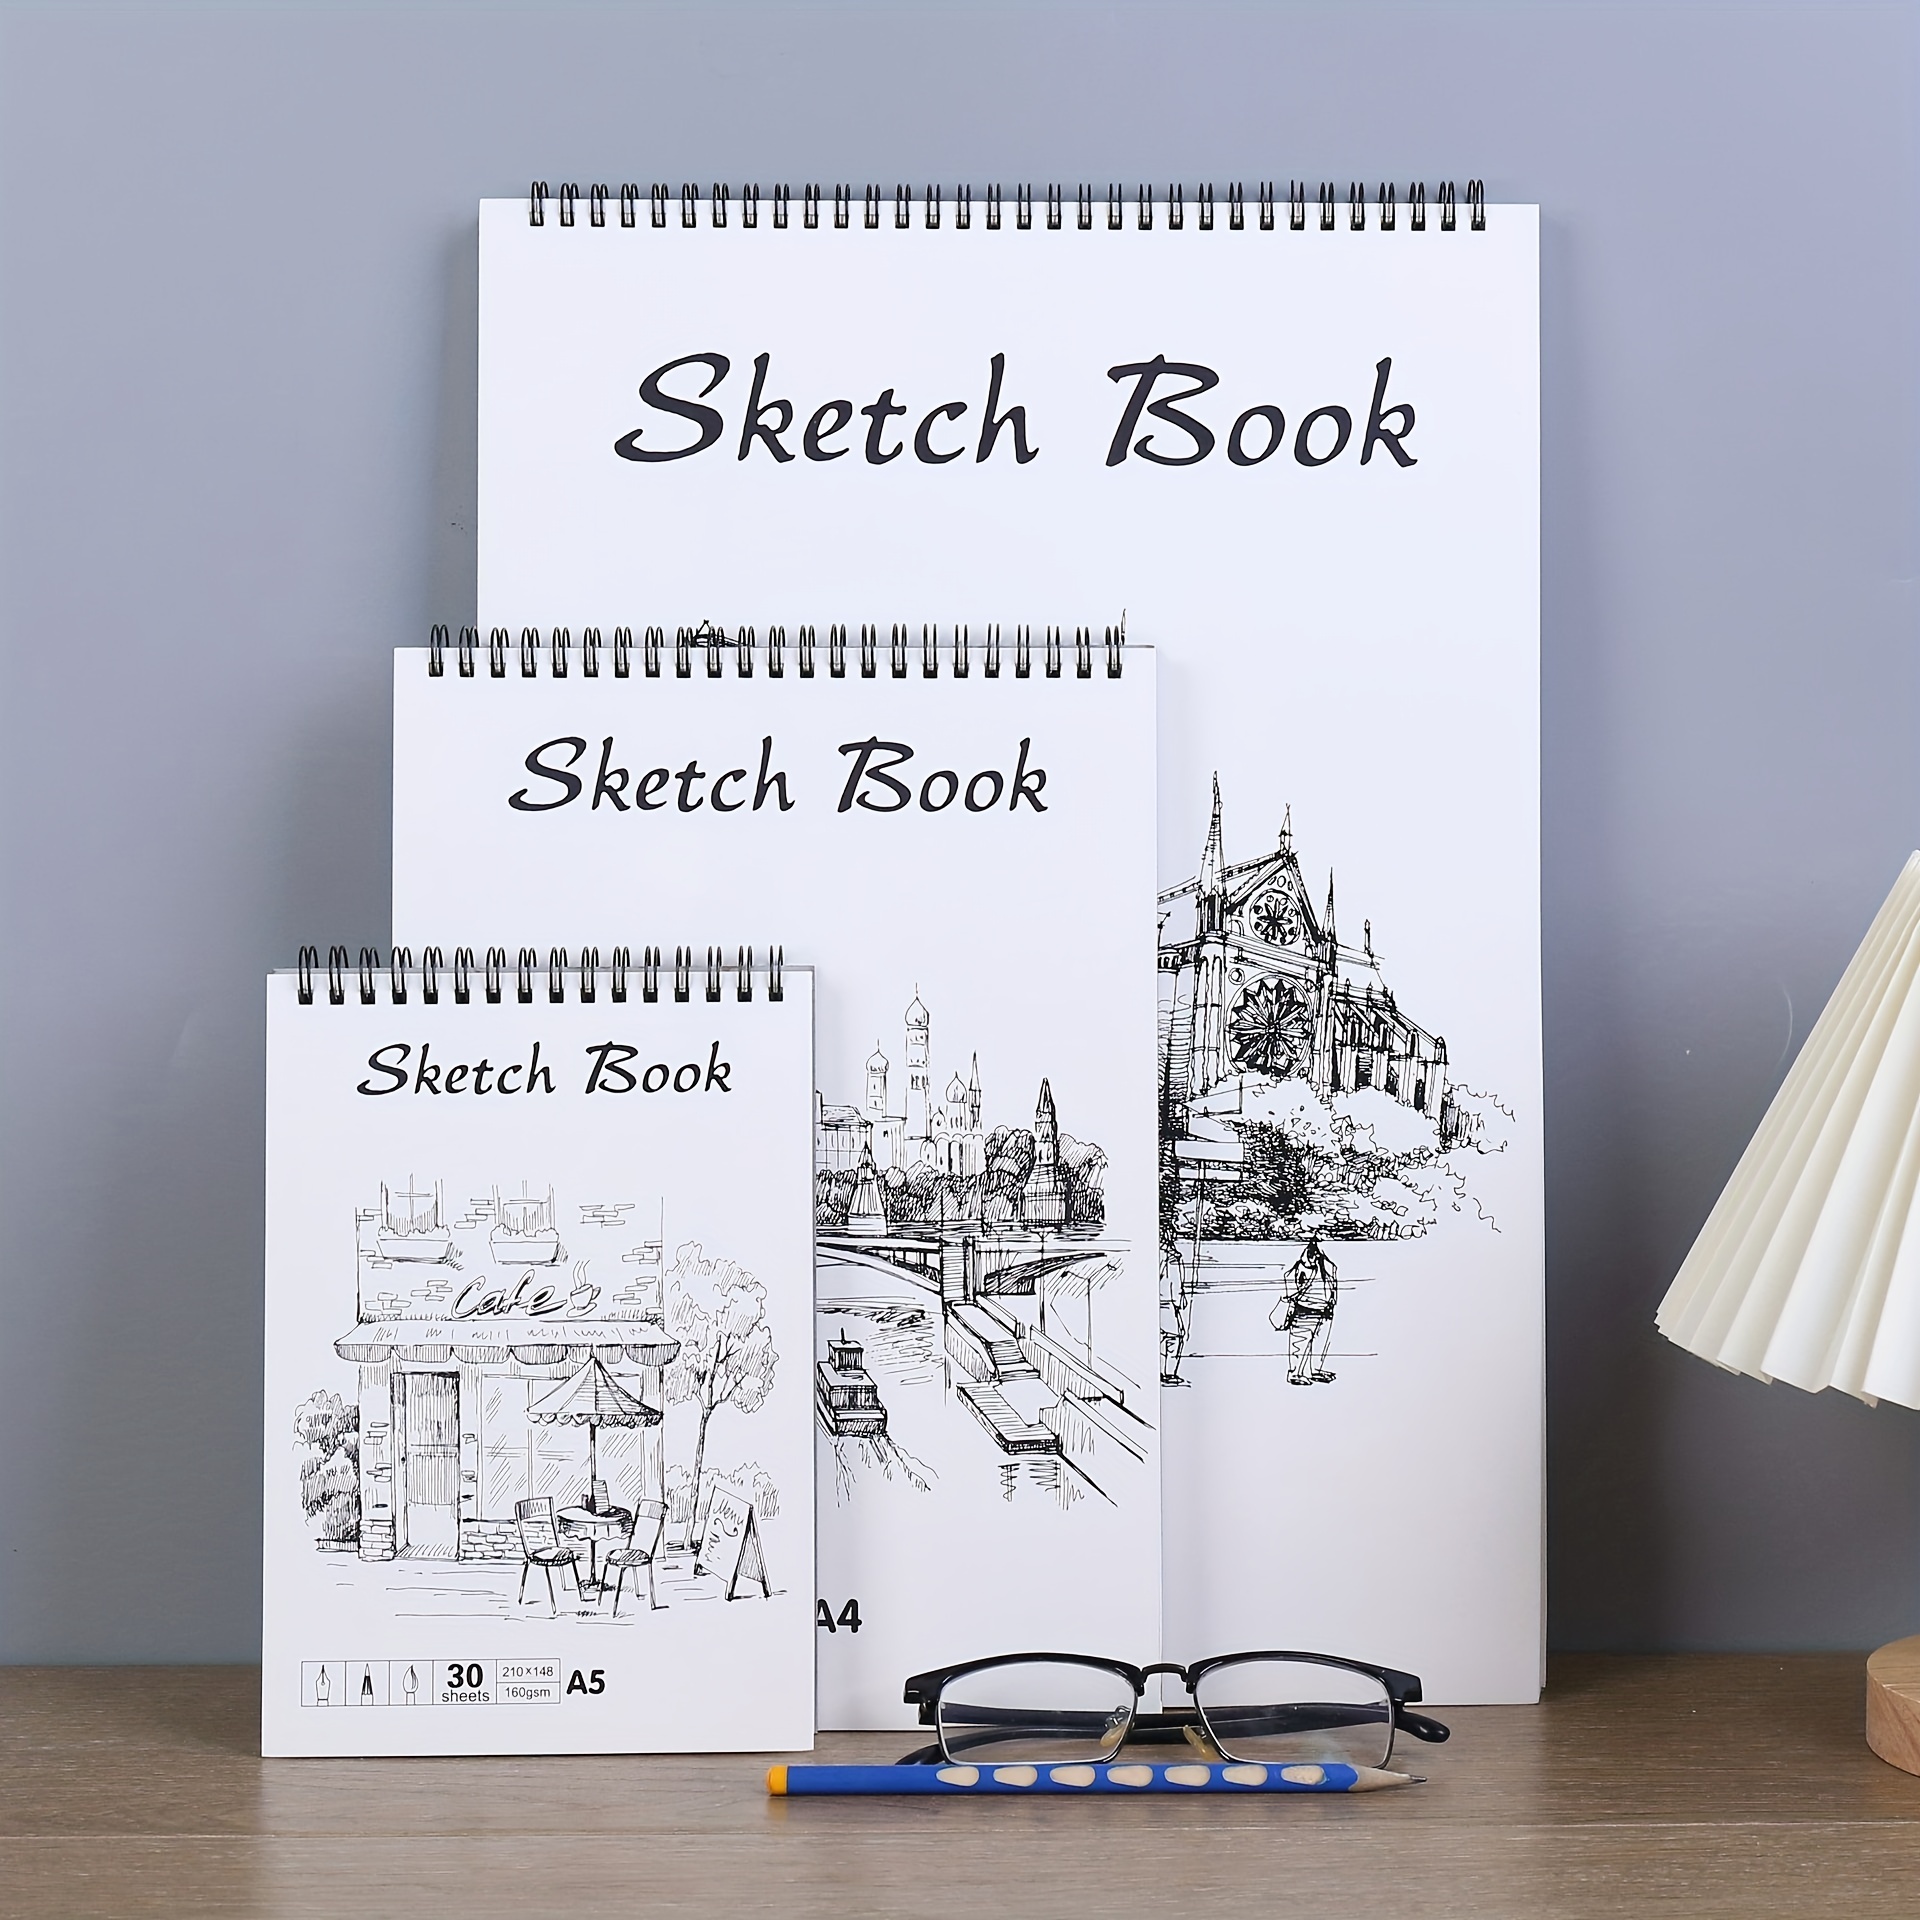 Drawing Book for Kids & Adults, A3 Sketch Book